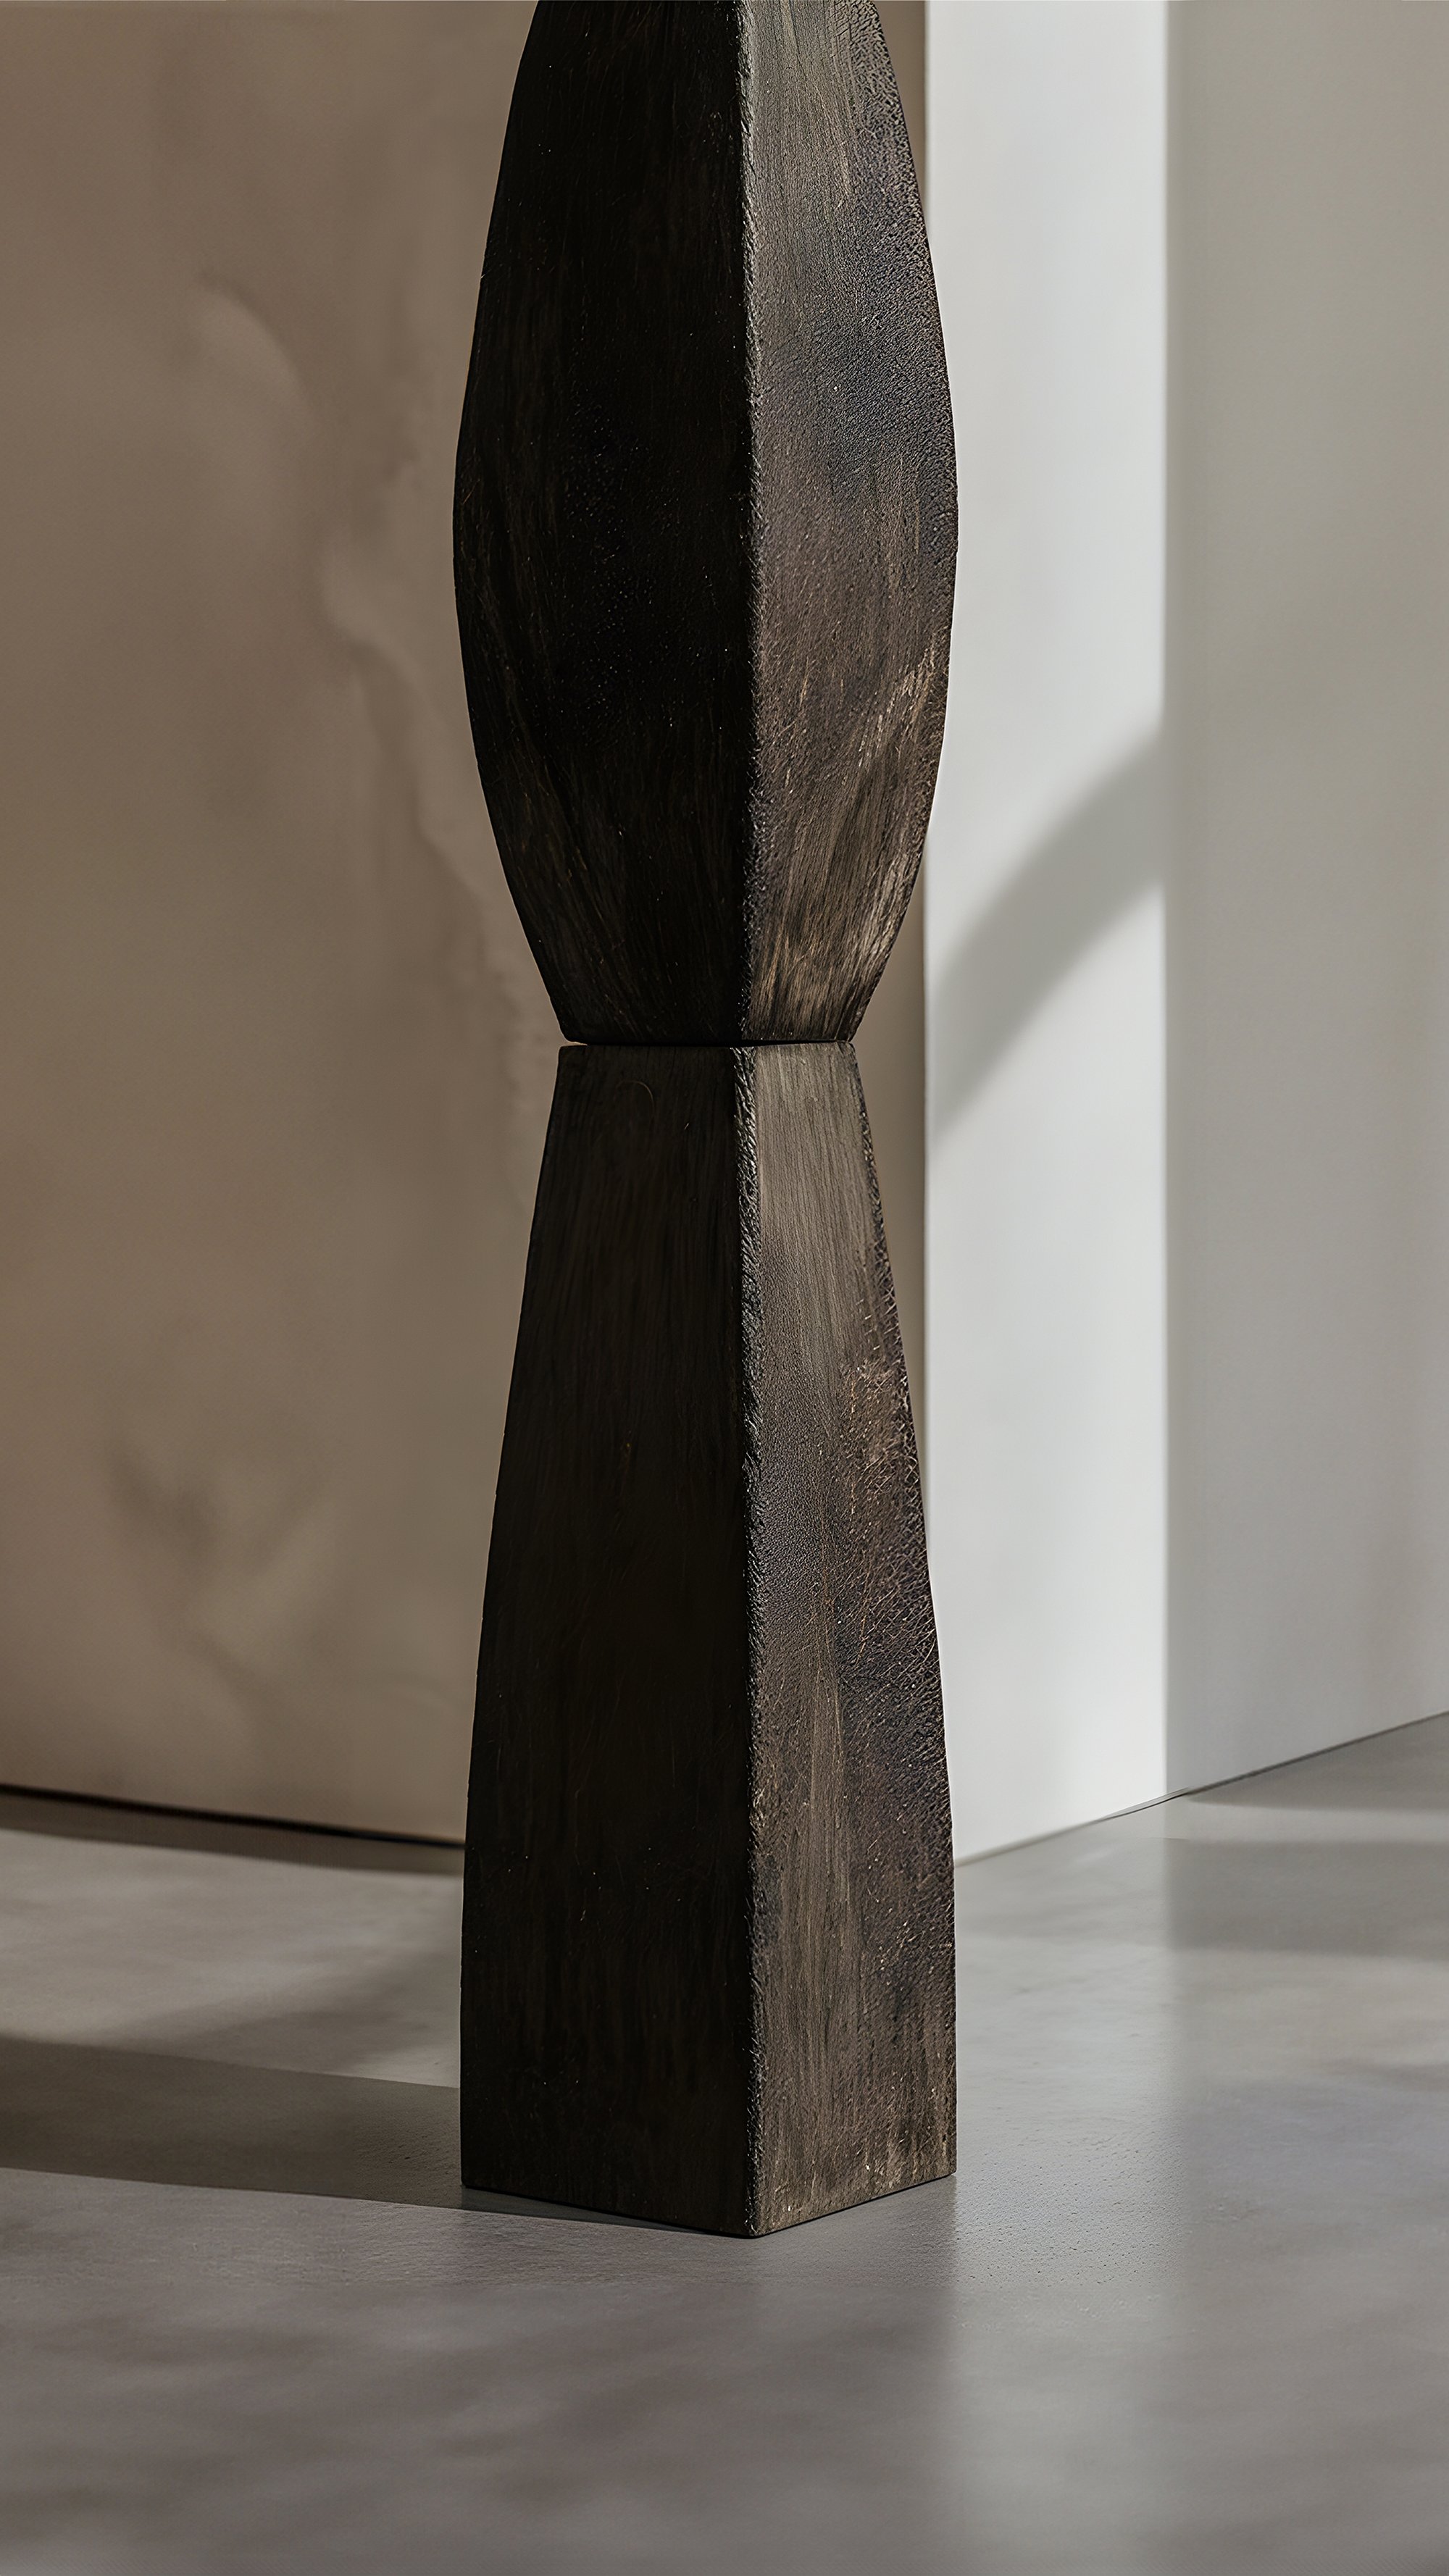 Sleek Abstract Sculpture in Burned Oak, Still Stand No82 by NONO -4.jpg